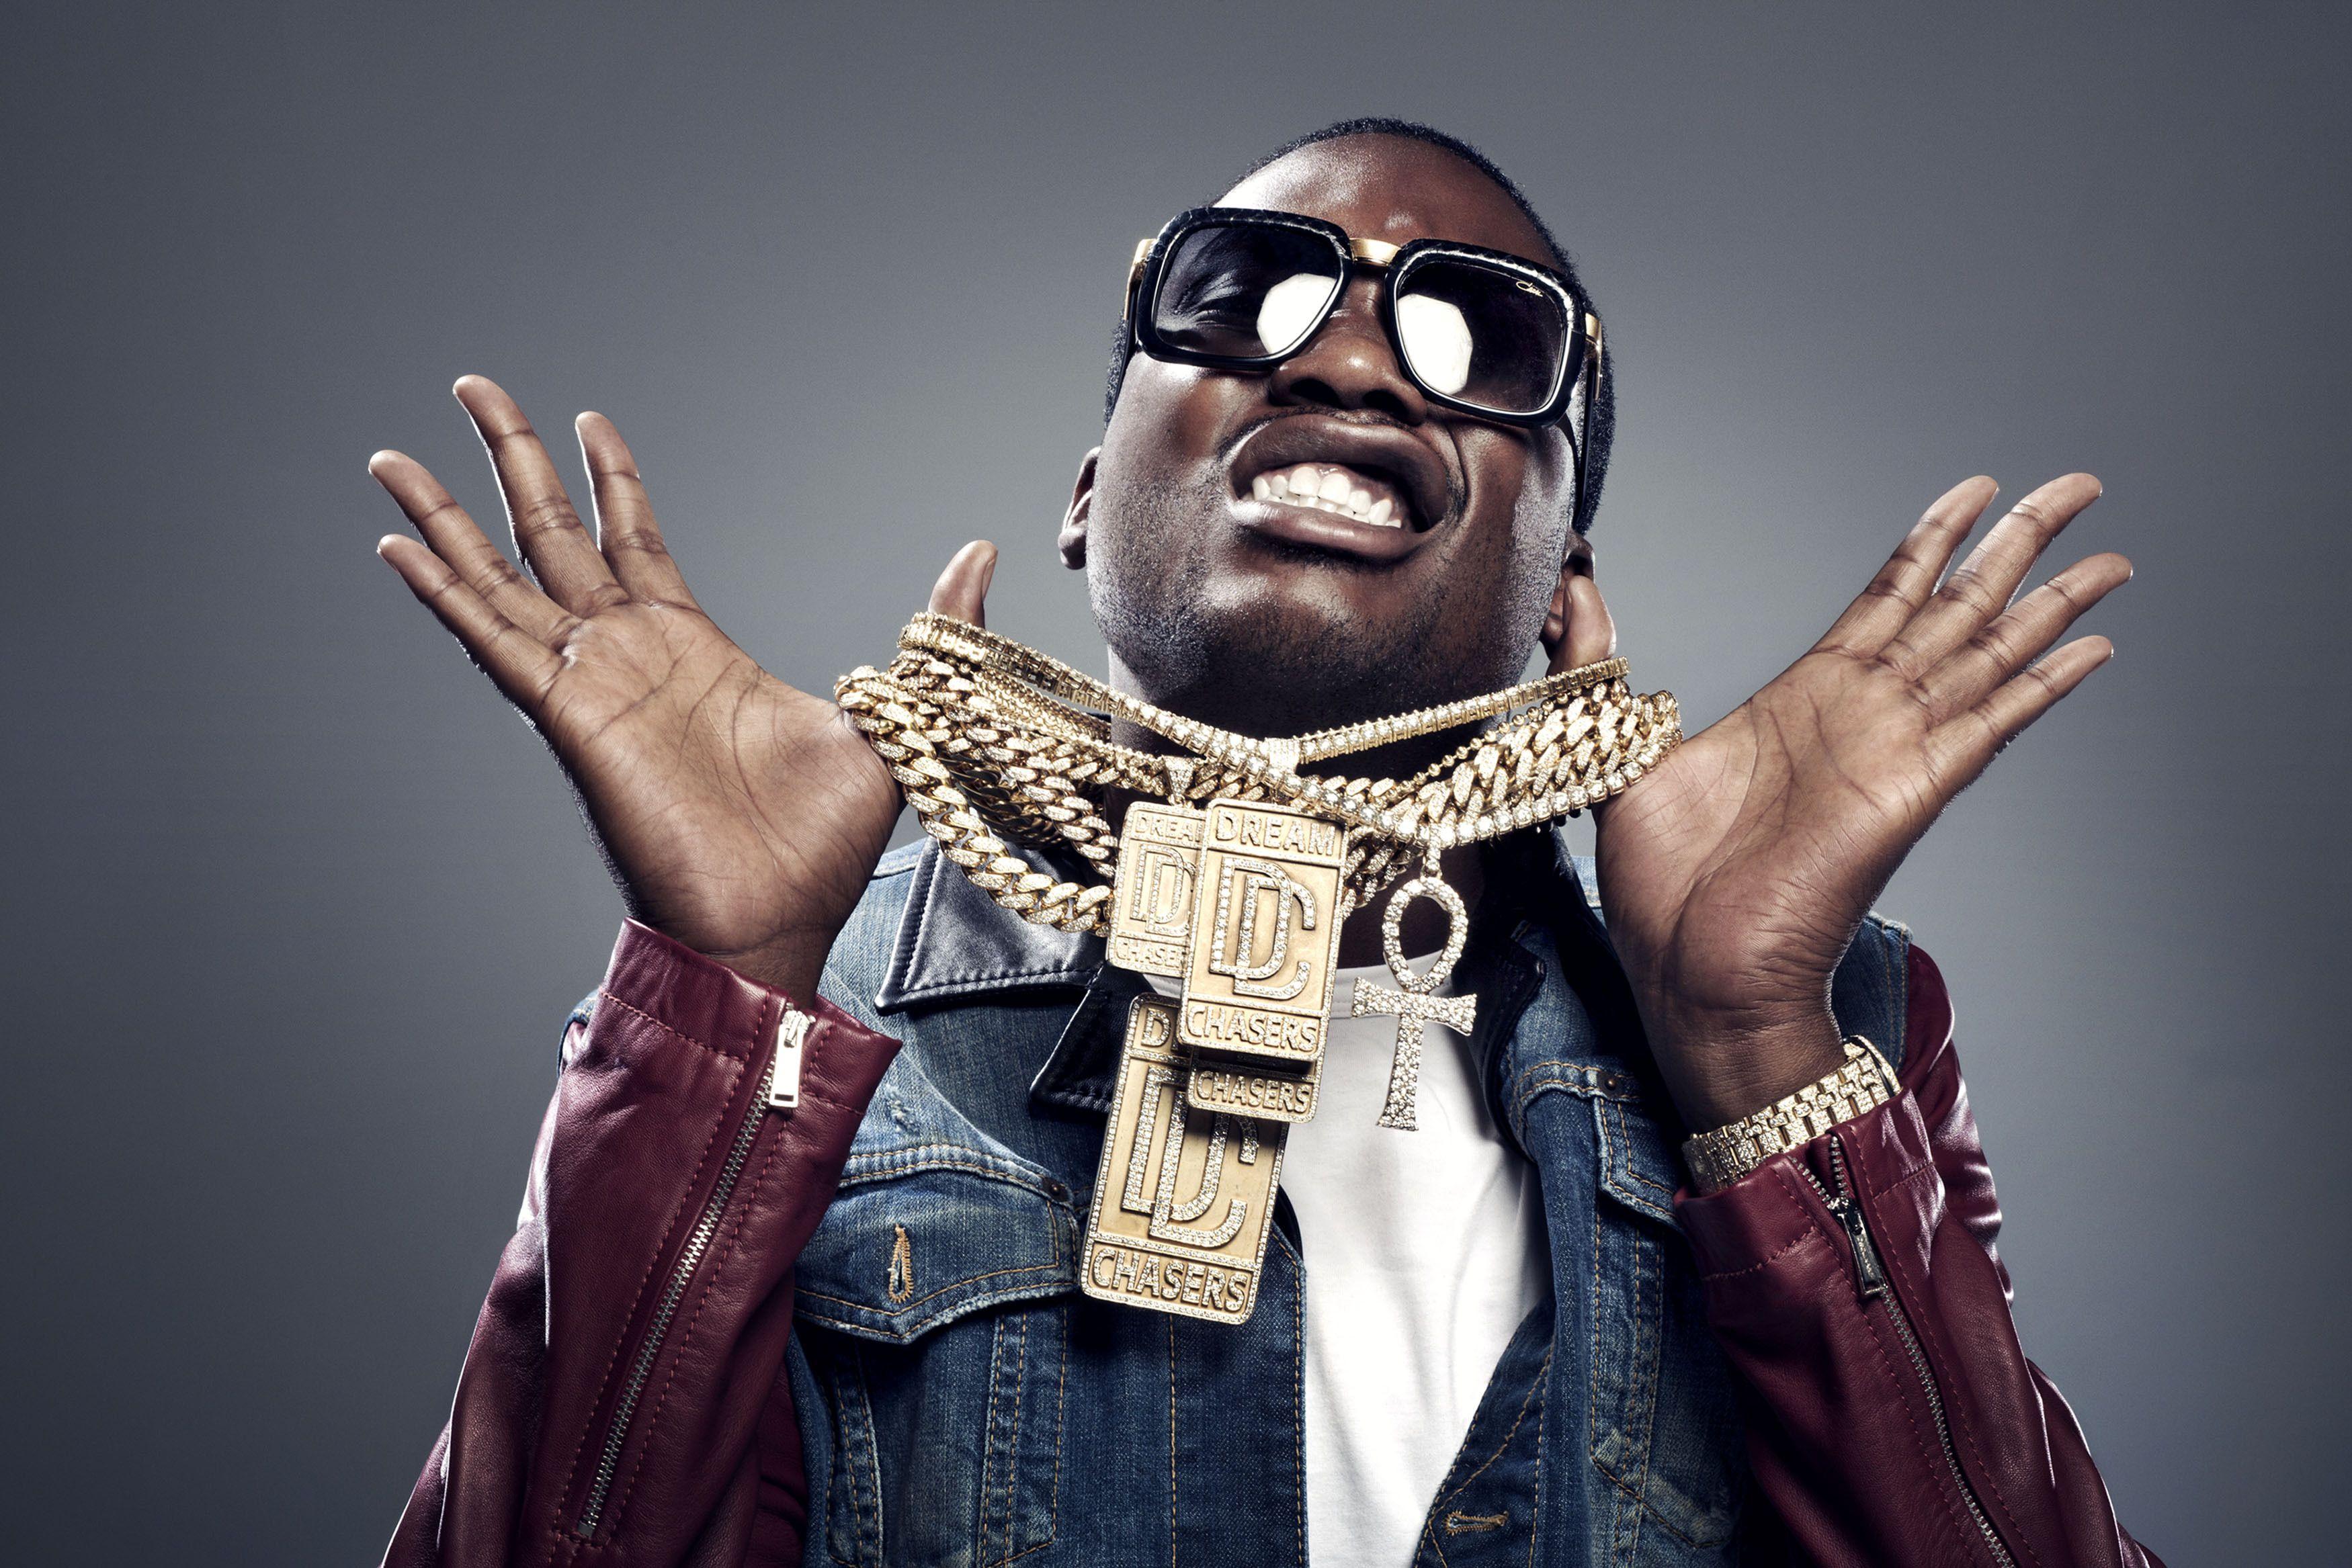 Download Meek Mill Posing on a Grand Staircase Wallpaper